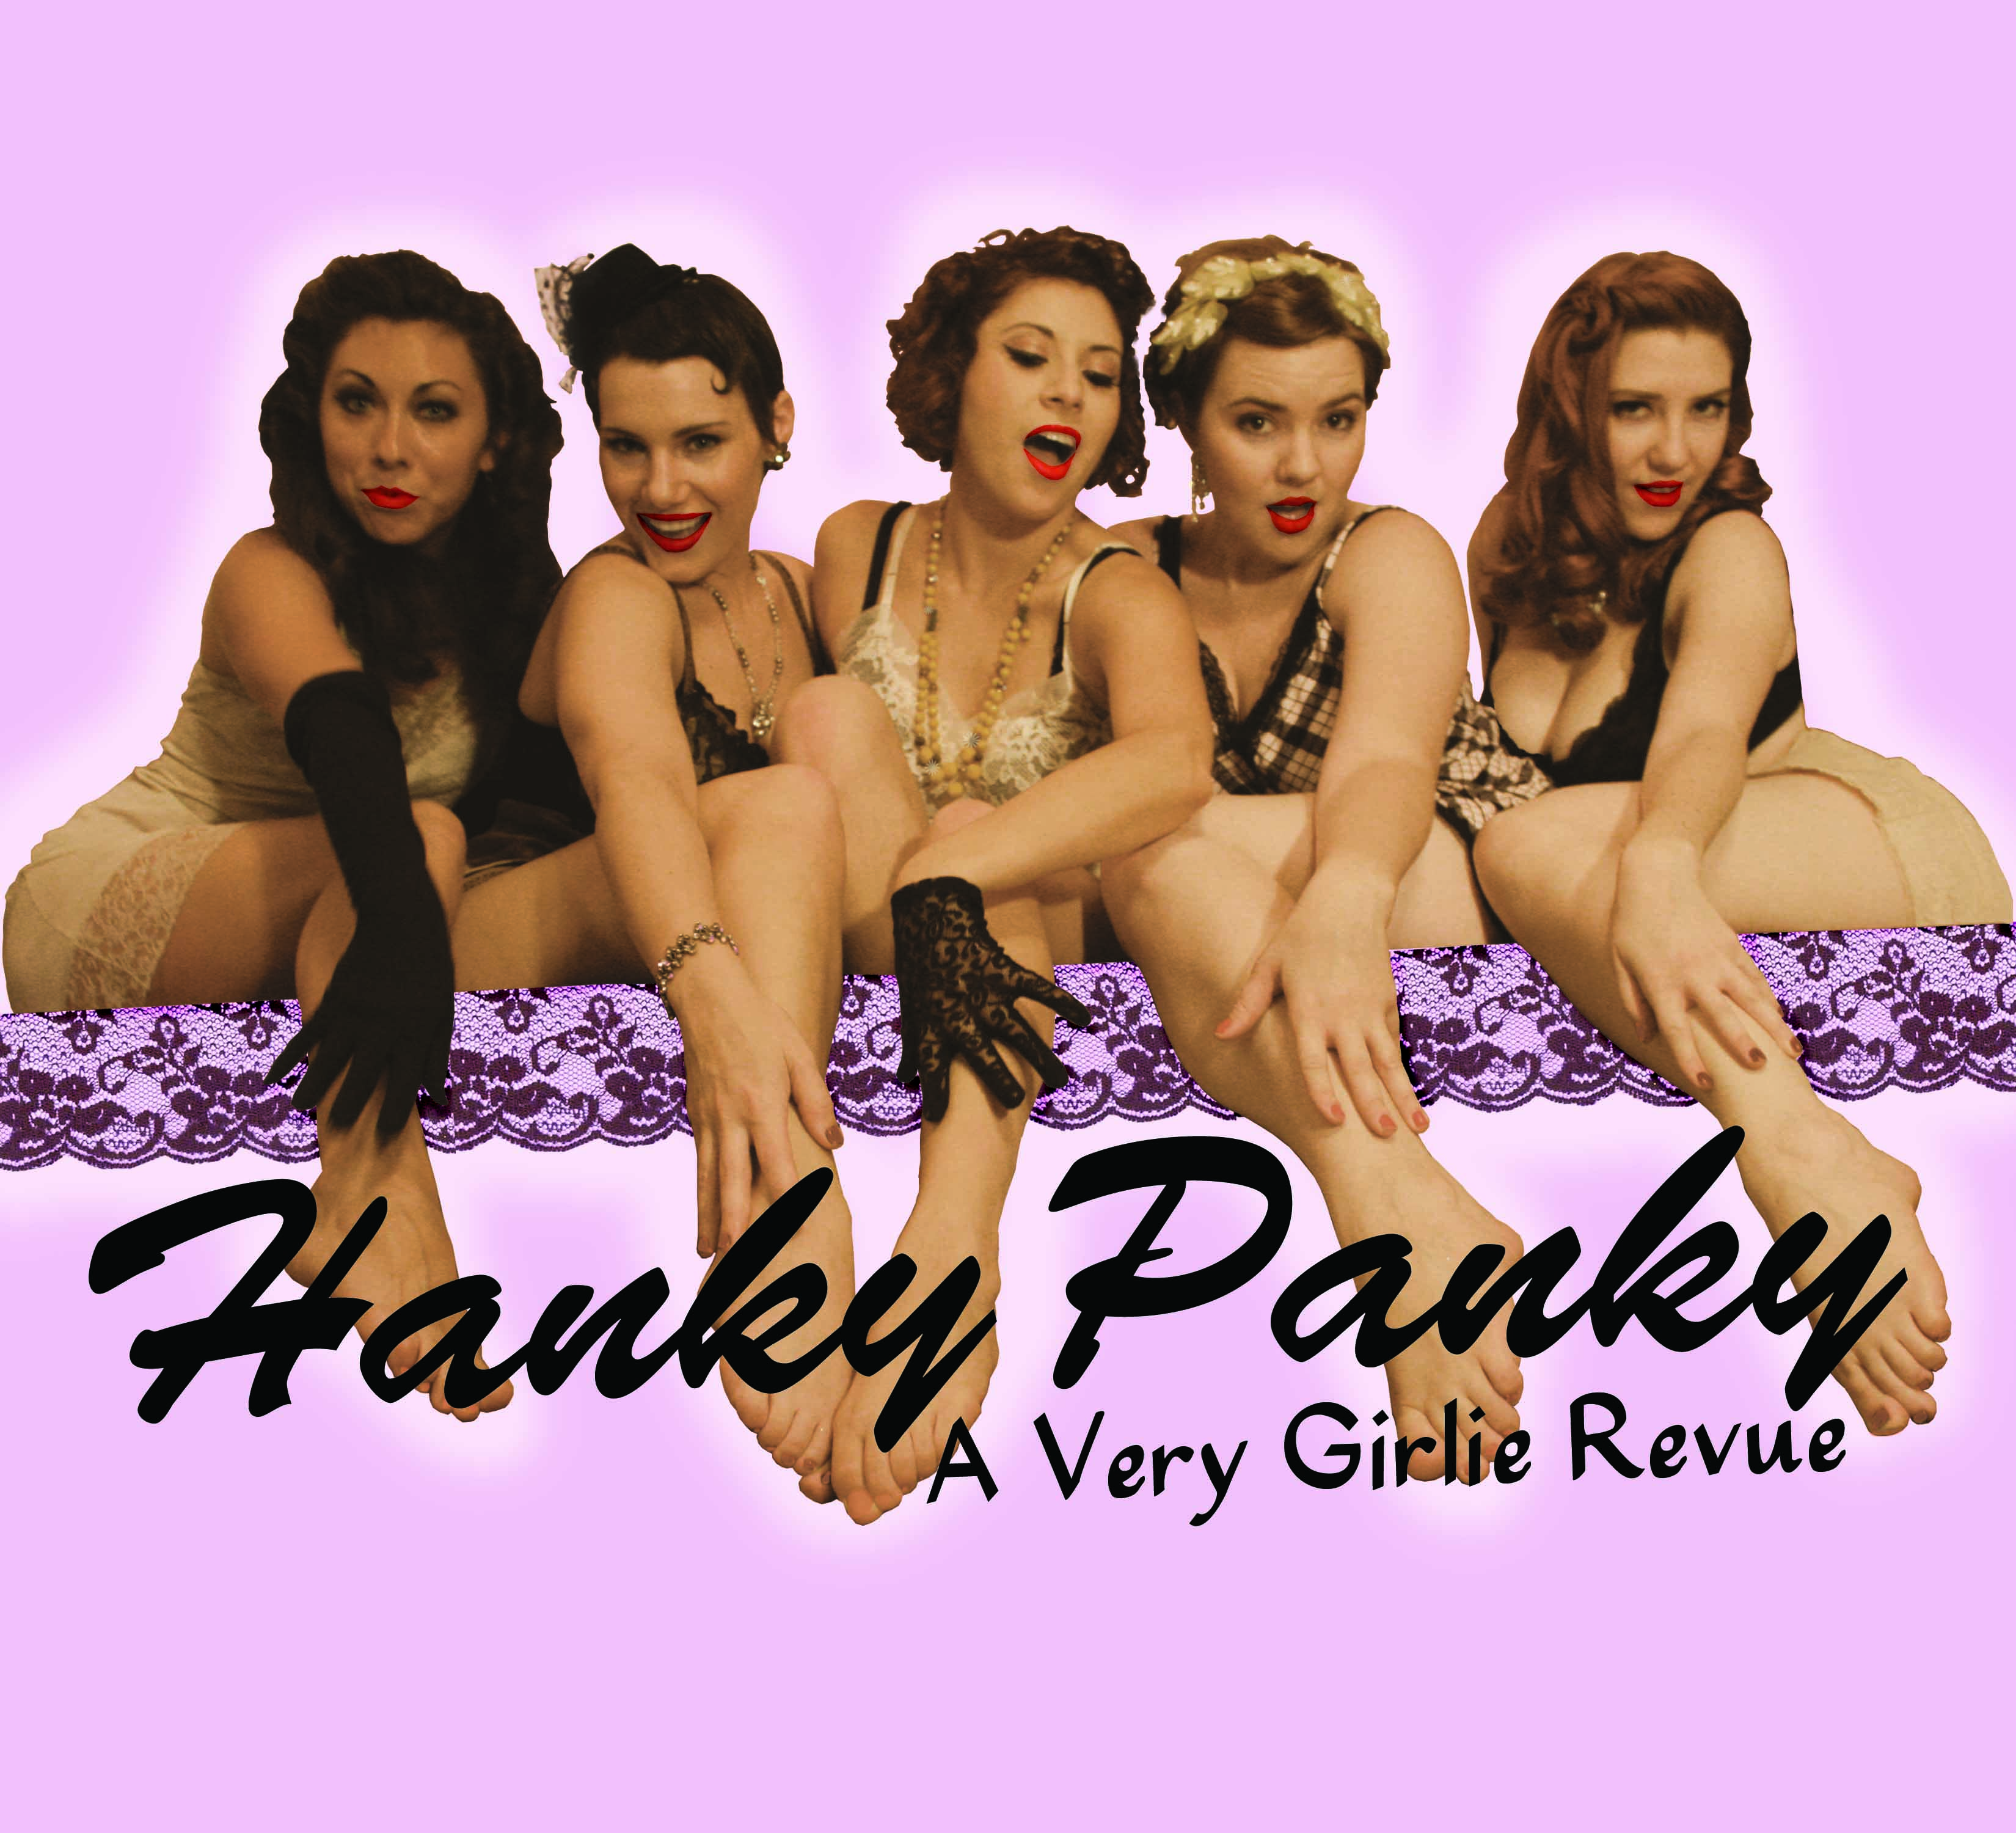 Publicity photo: Hanky Panky: A Very Girlie Revue